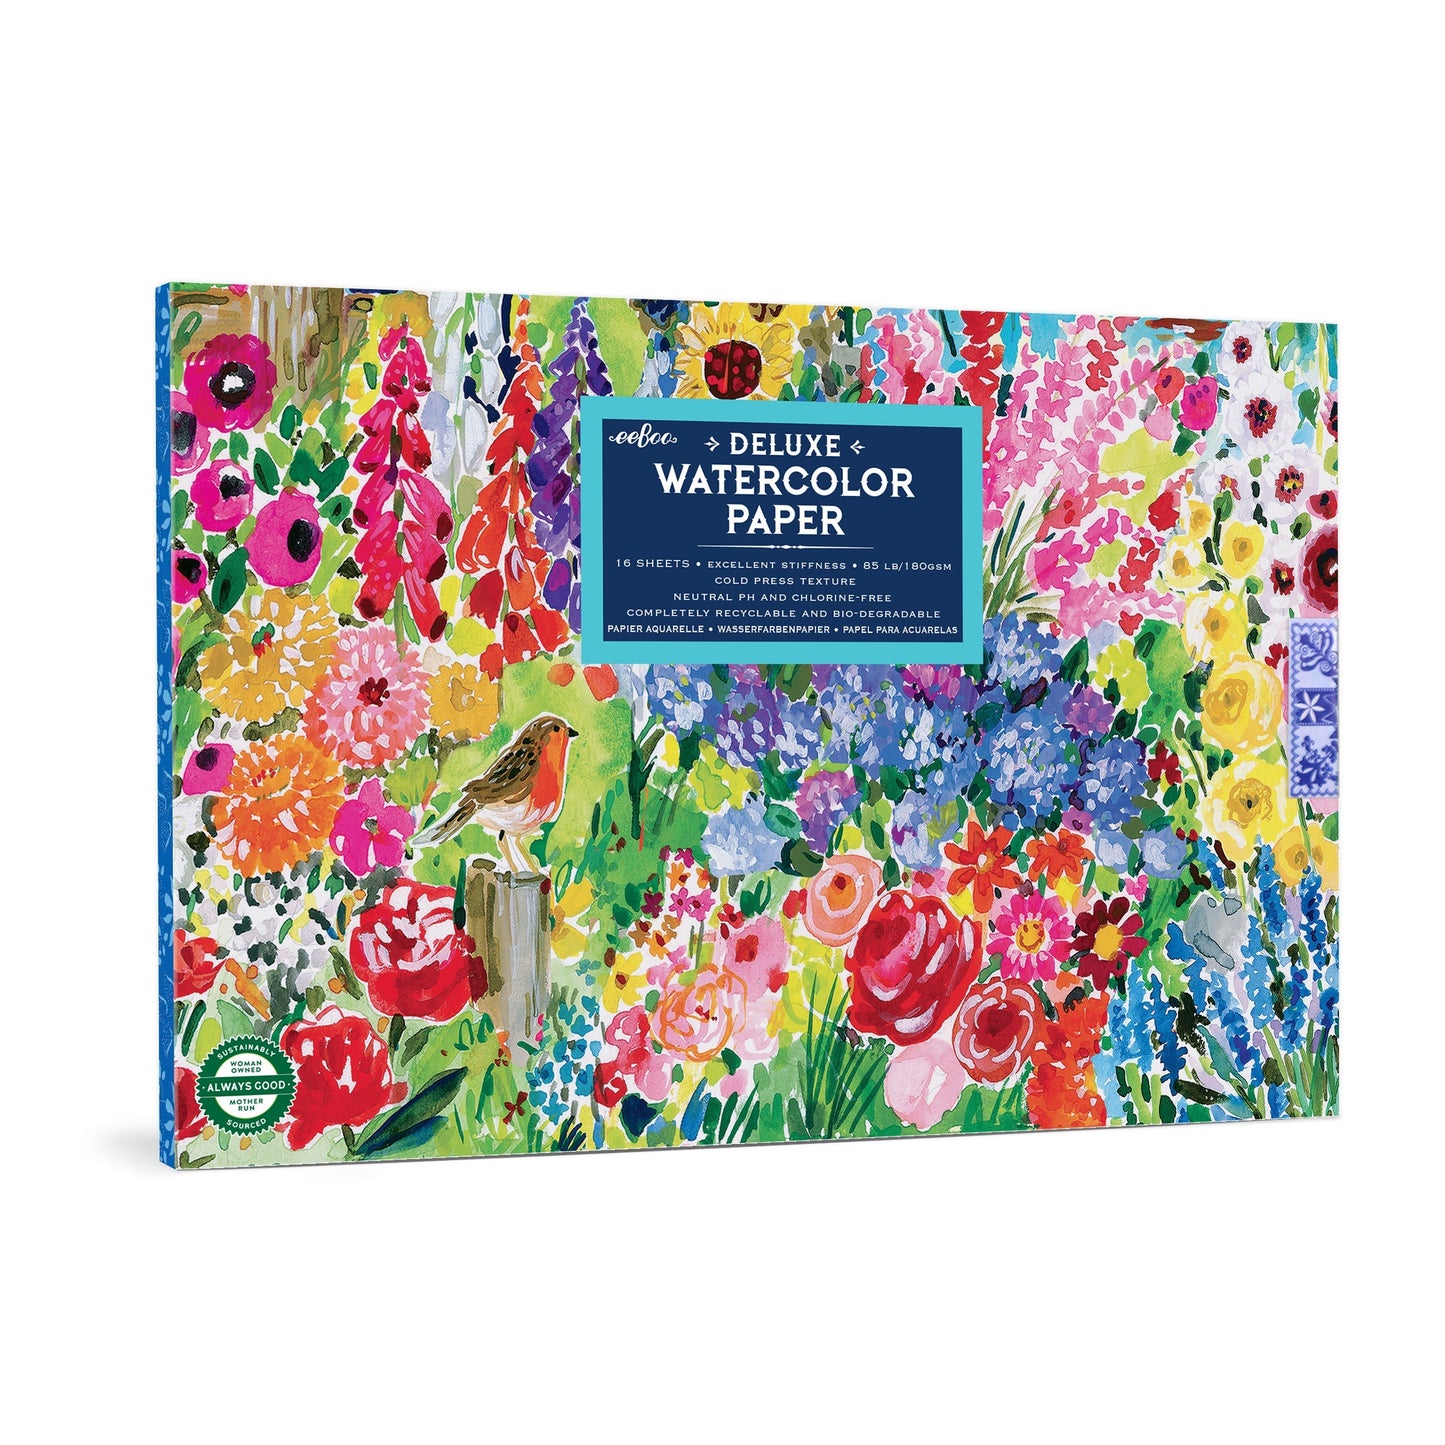  Seaside Garden Watercolor Pad | Unique Great Gifts for Kids & Adults 